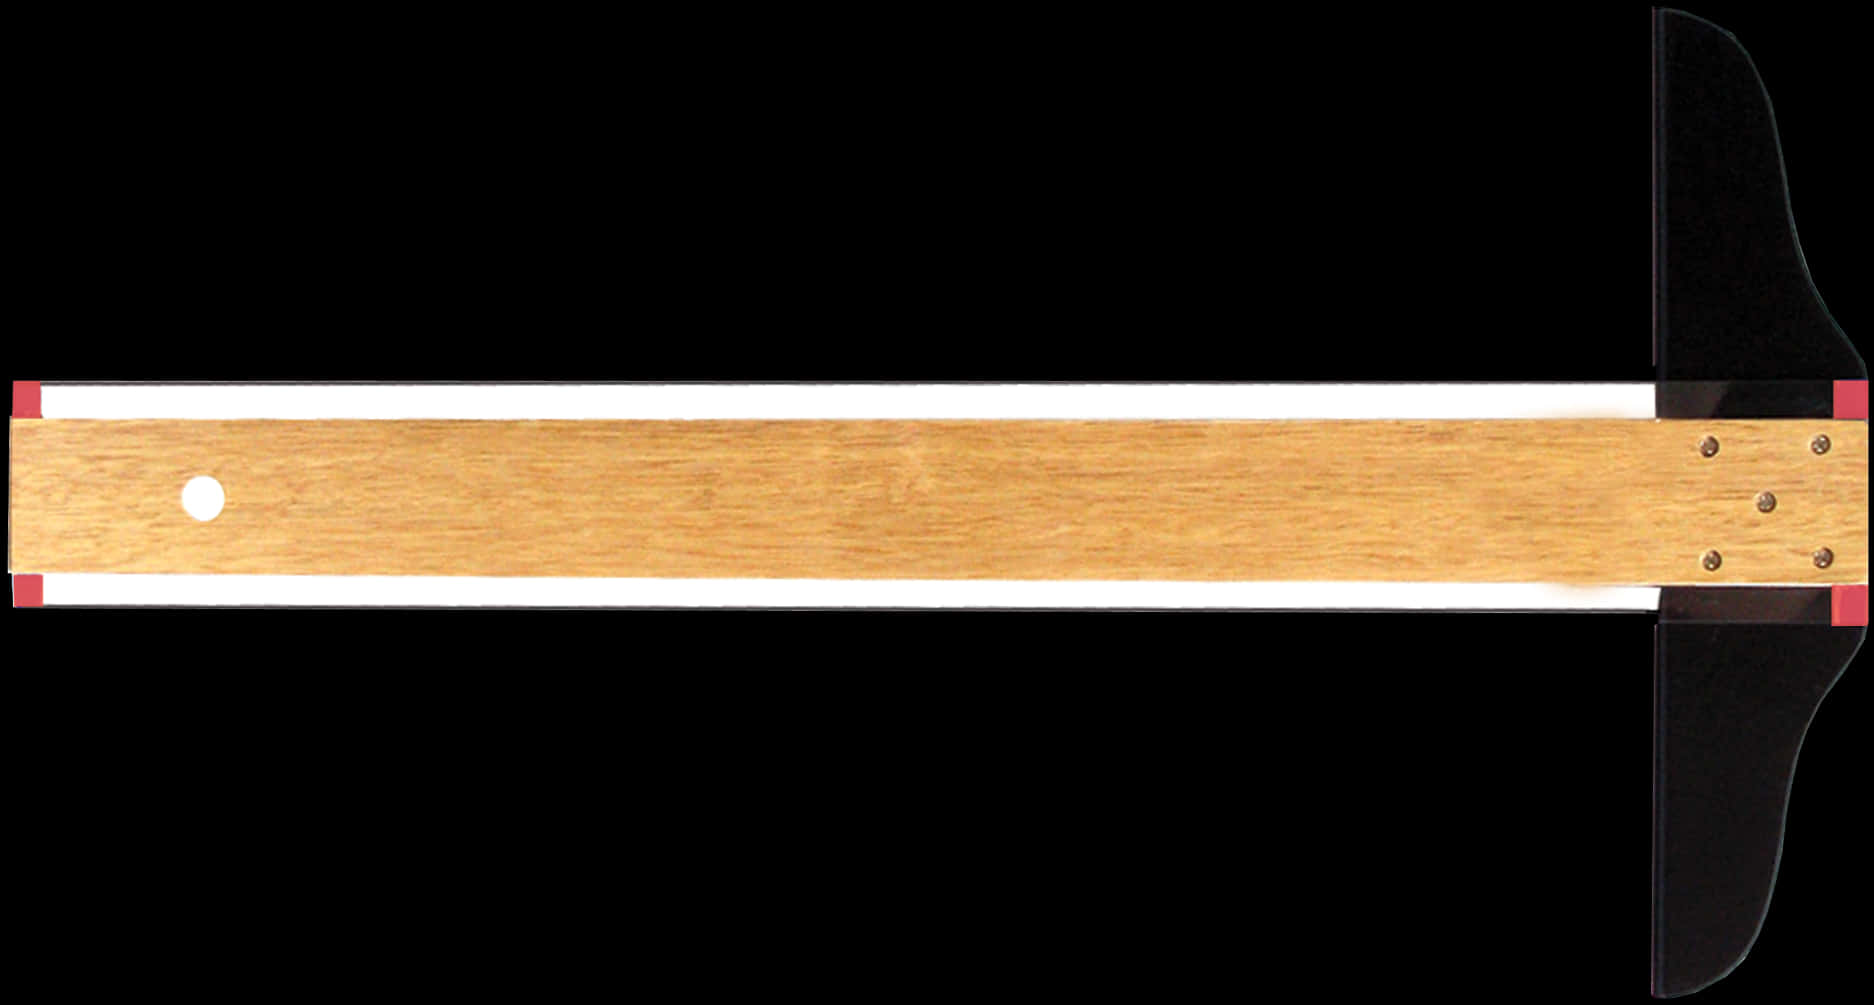 A Close Up Of A Wood Plank